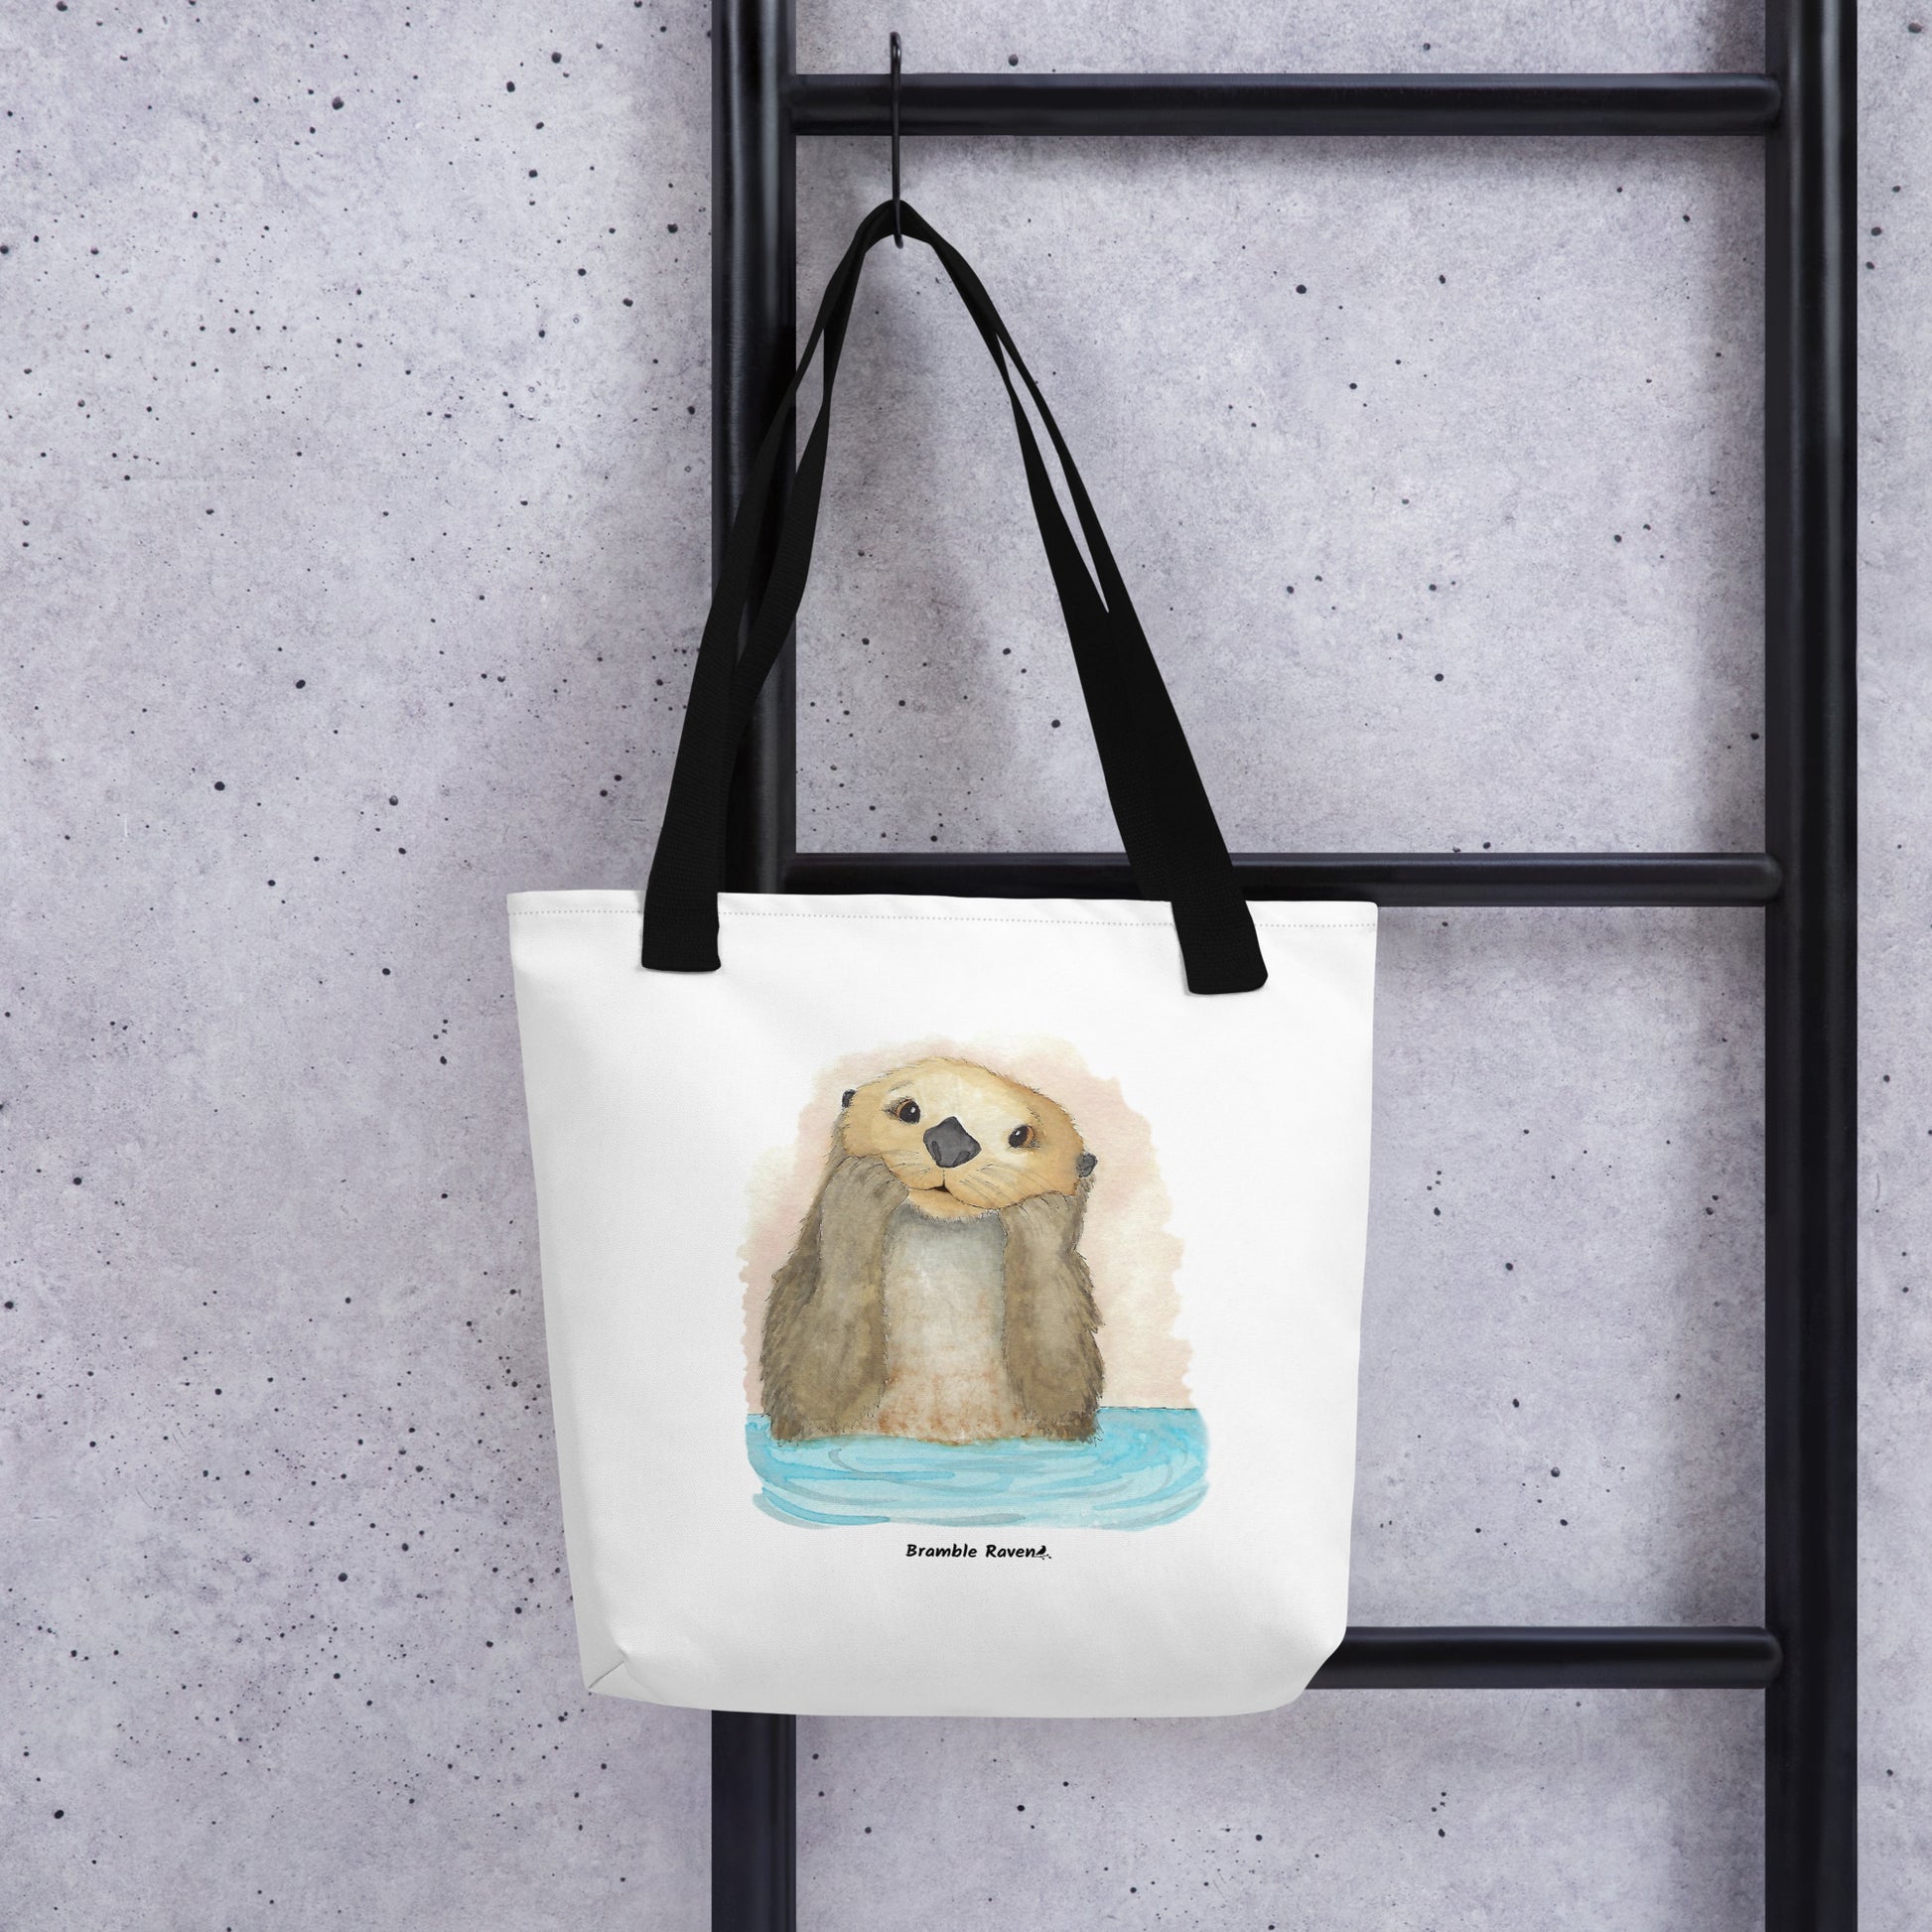 Otter Amazement sturdy tote bag. Measures 15" by 15" and can hold up to 44 lbs. Features watercolor sea otter painting printed on front and back. Has black handles. Shown hanging from a black ladder.